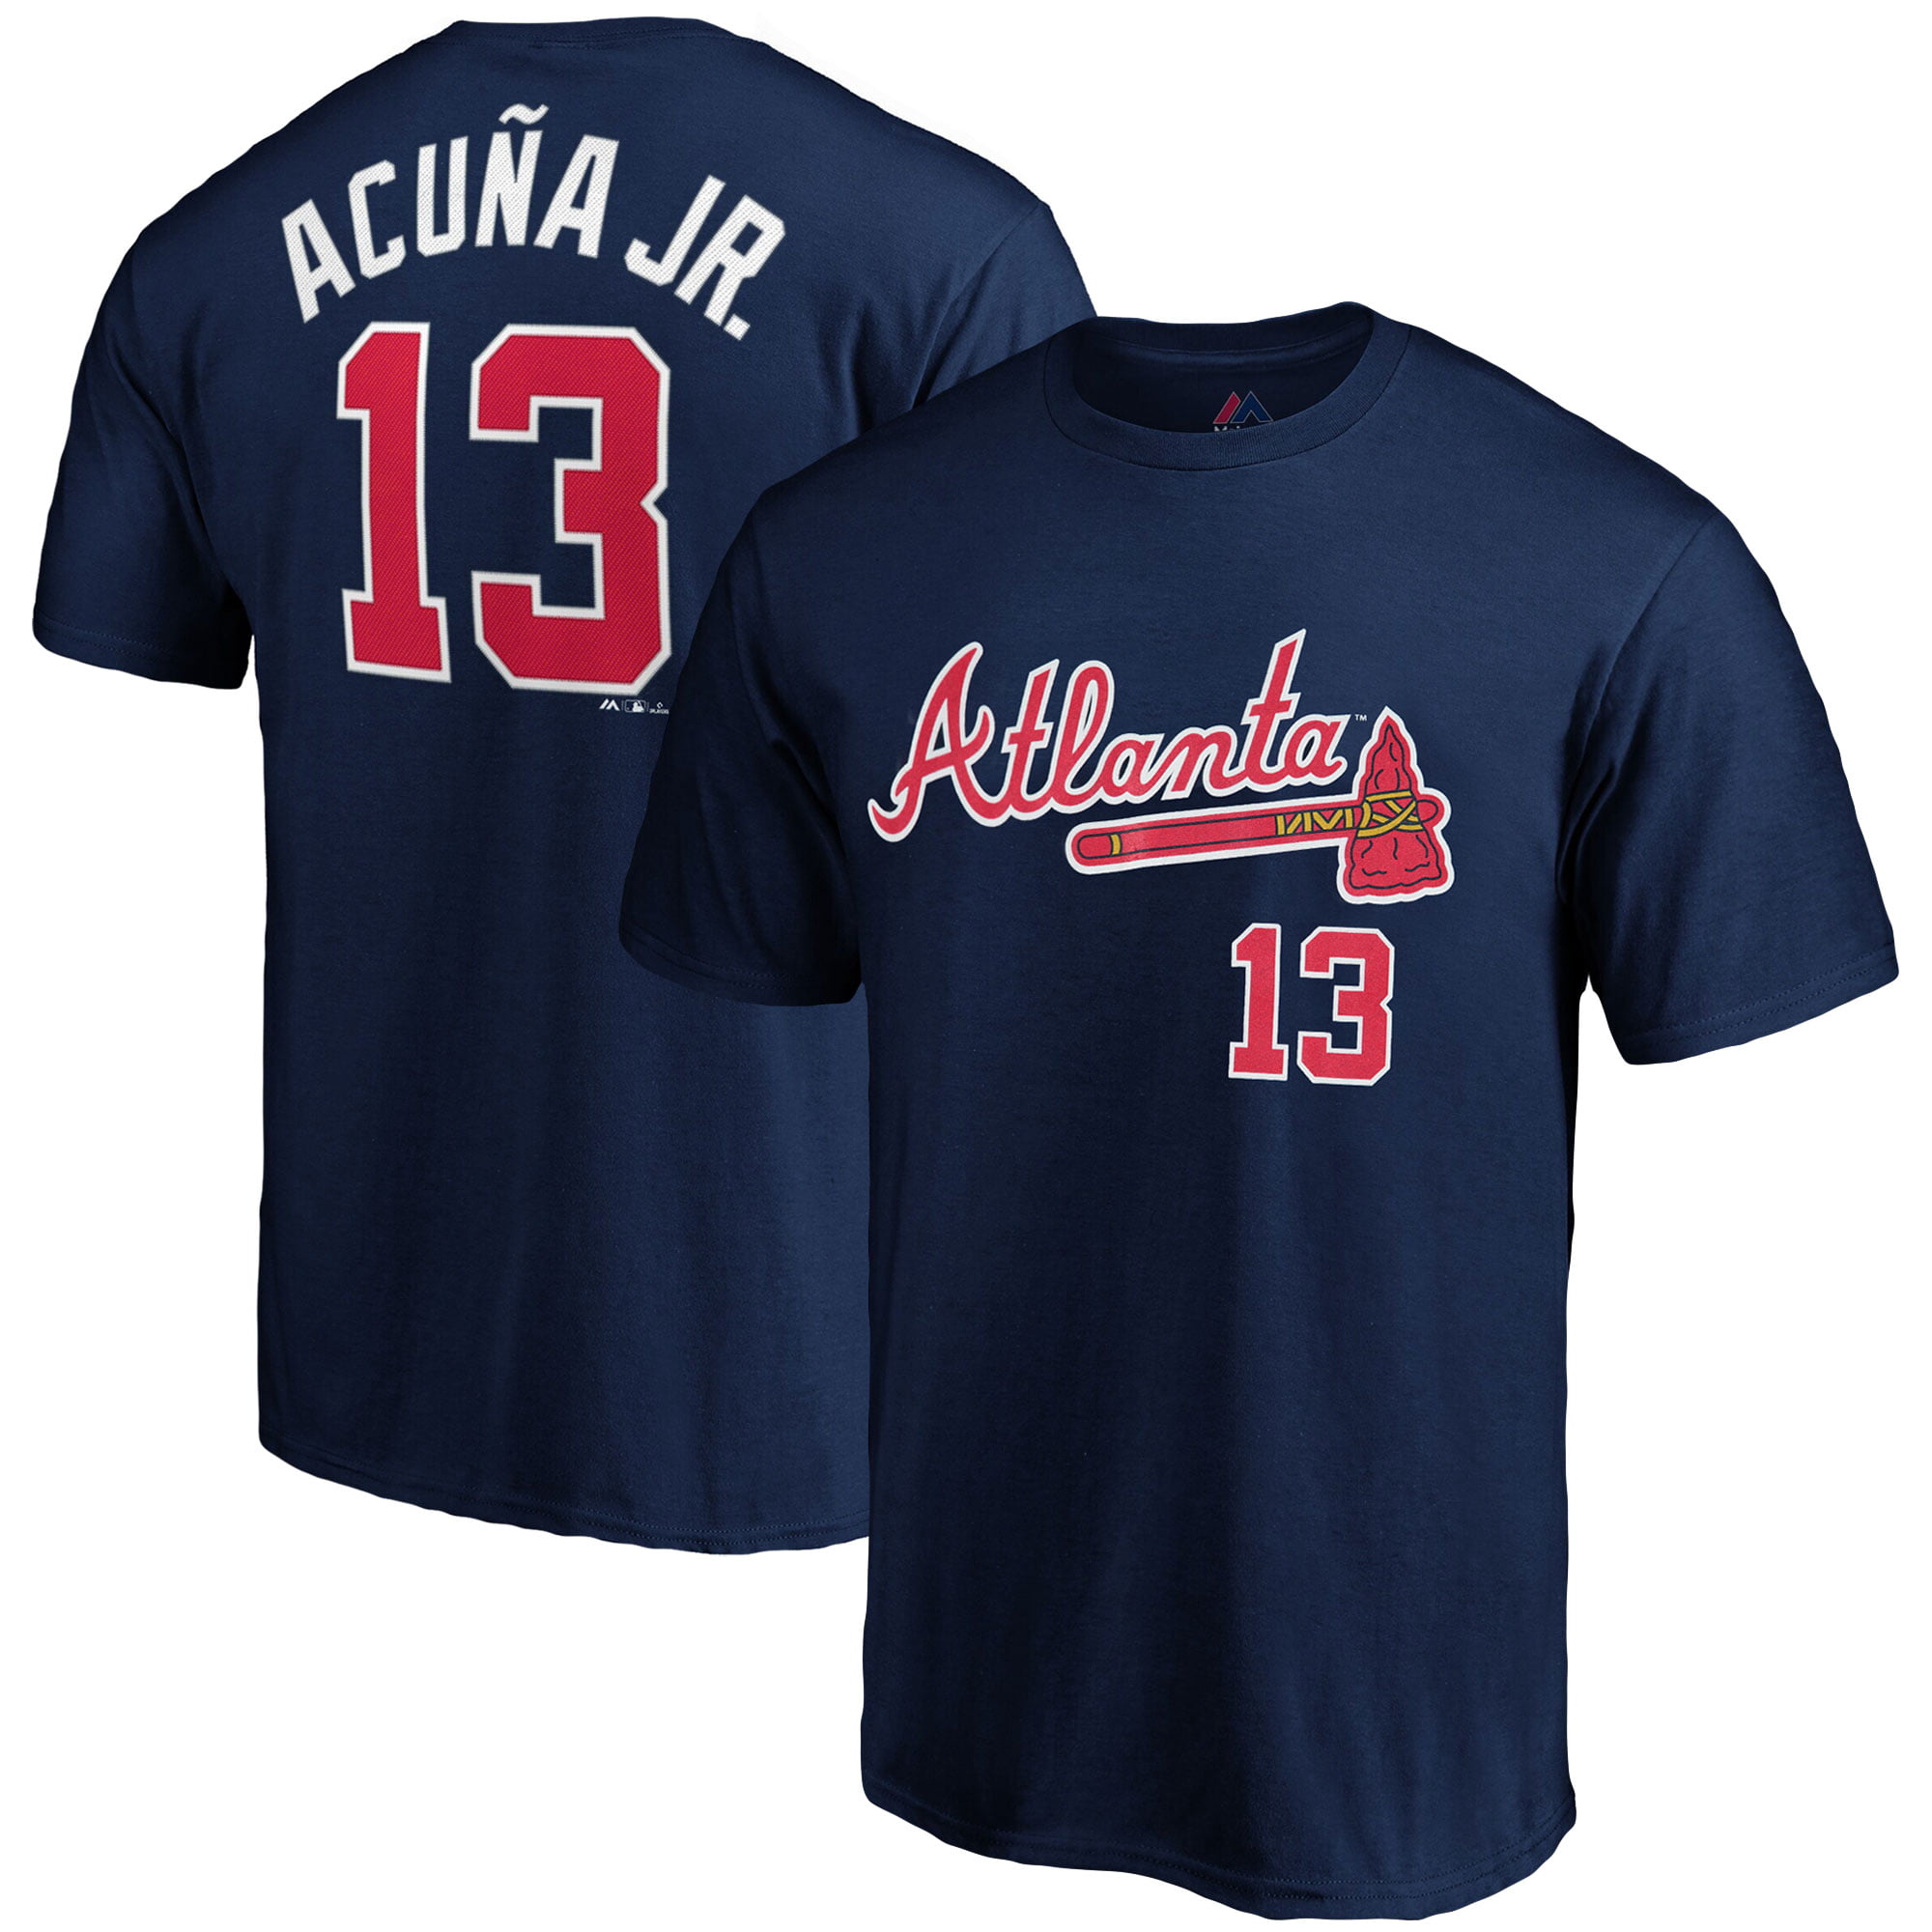 for the a braves shirt